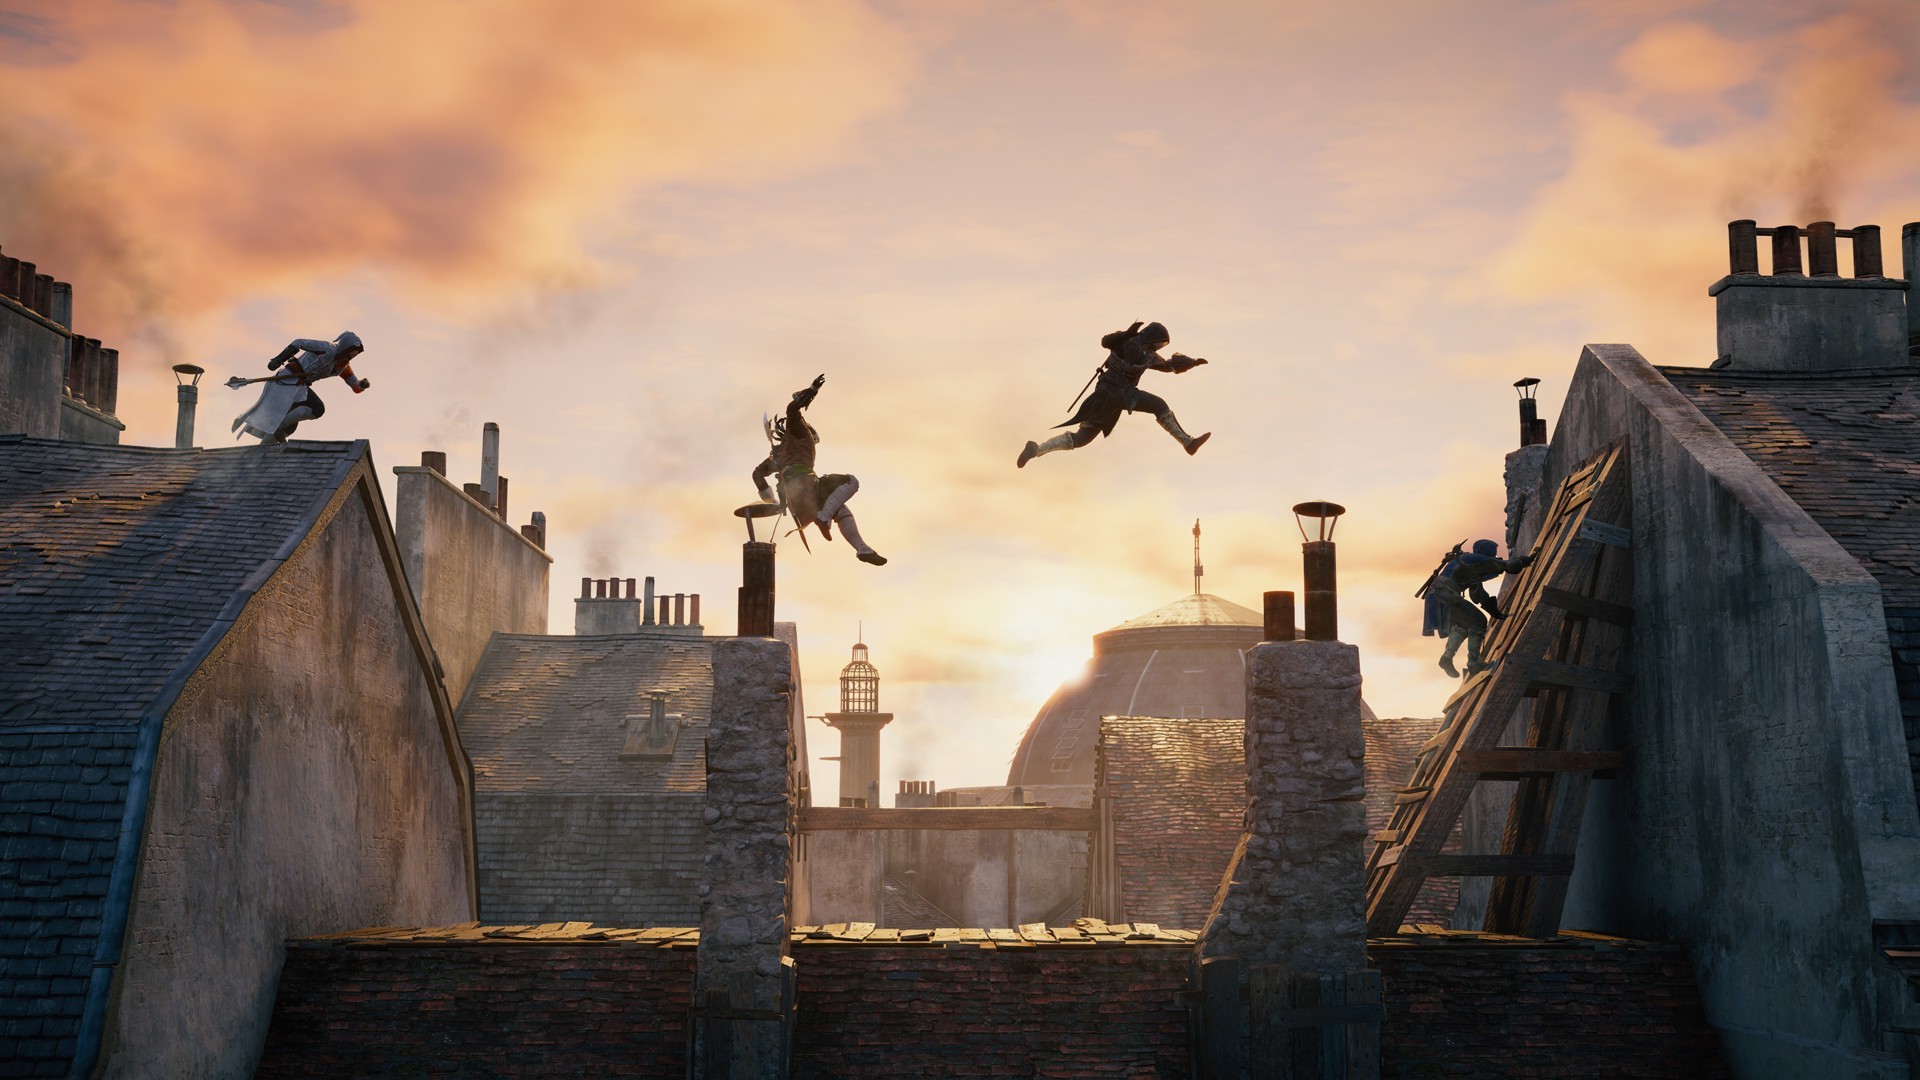 Assassins Creed Video Games Rooftops Parkour Sequence Photography Wallpapers Hd Desktop And Mobile Backgrounds